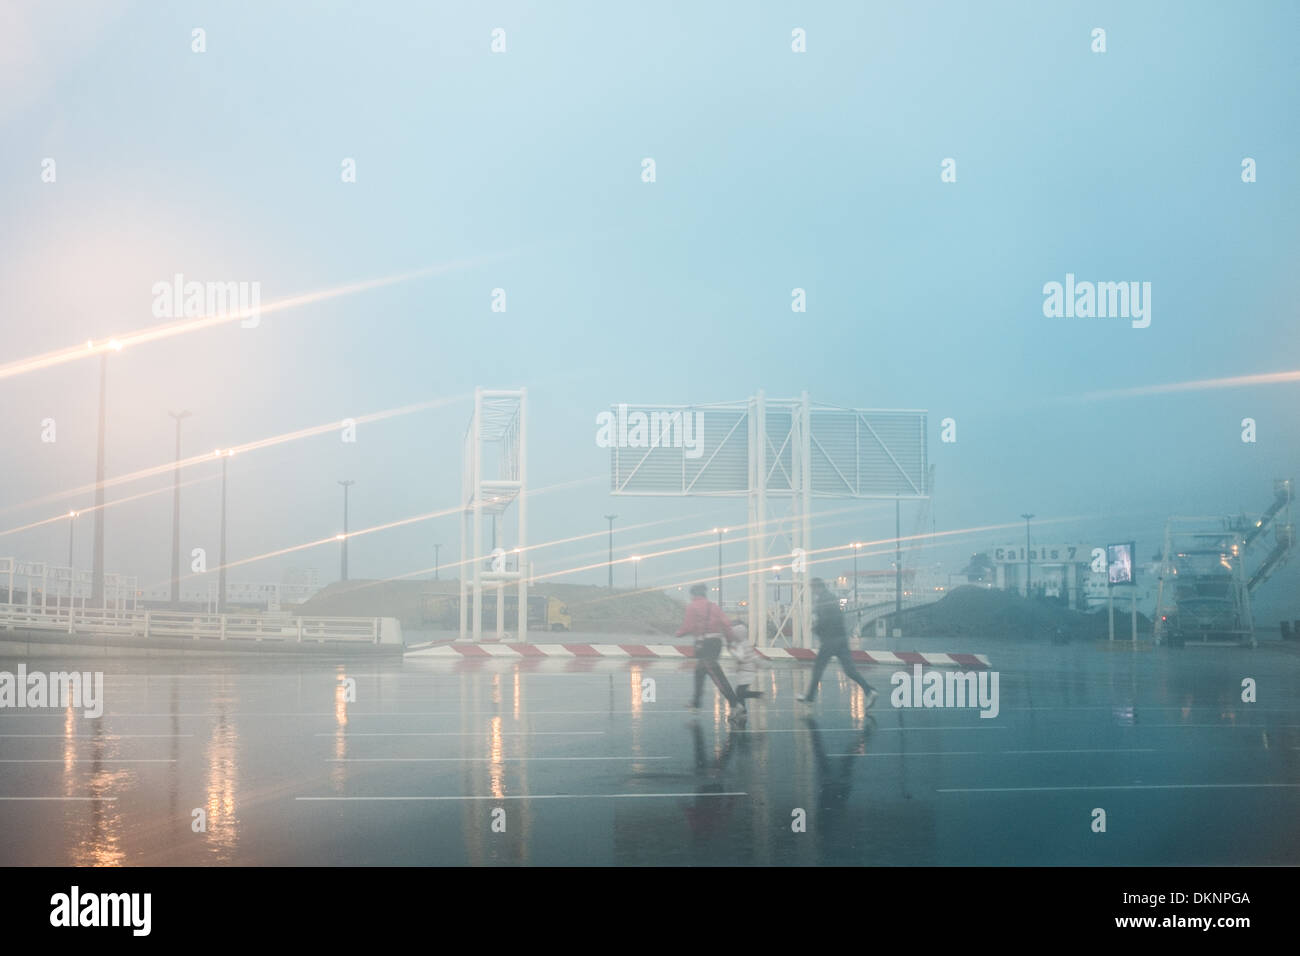 2 People Runing in the Rain, Port of Calais, France. Stock Photo